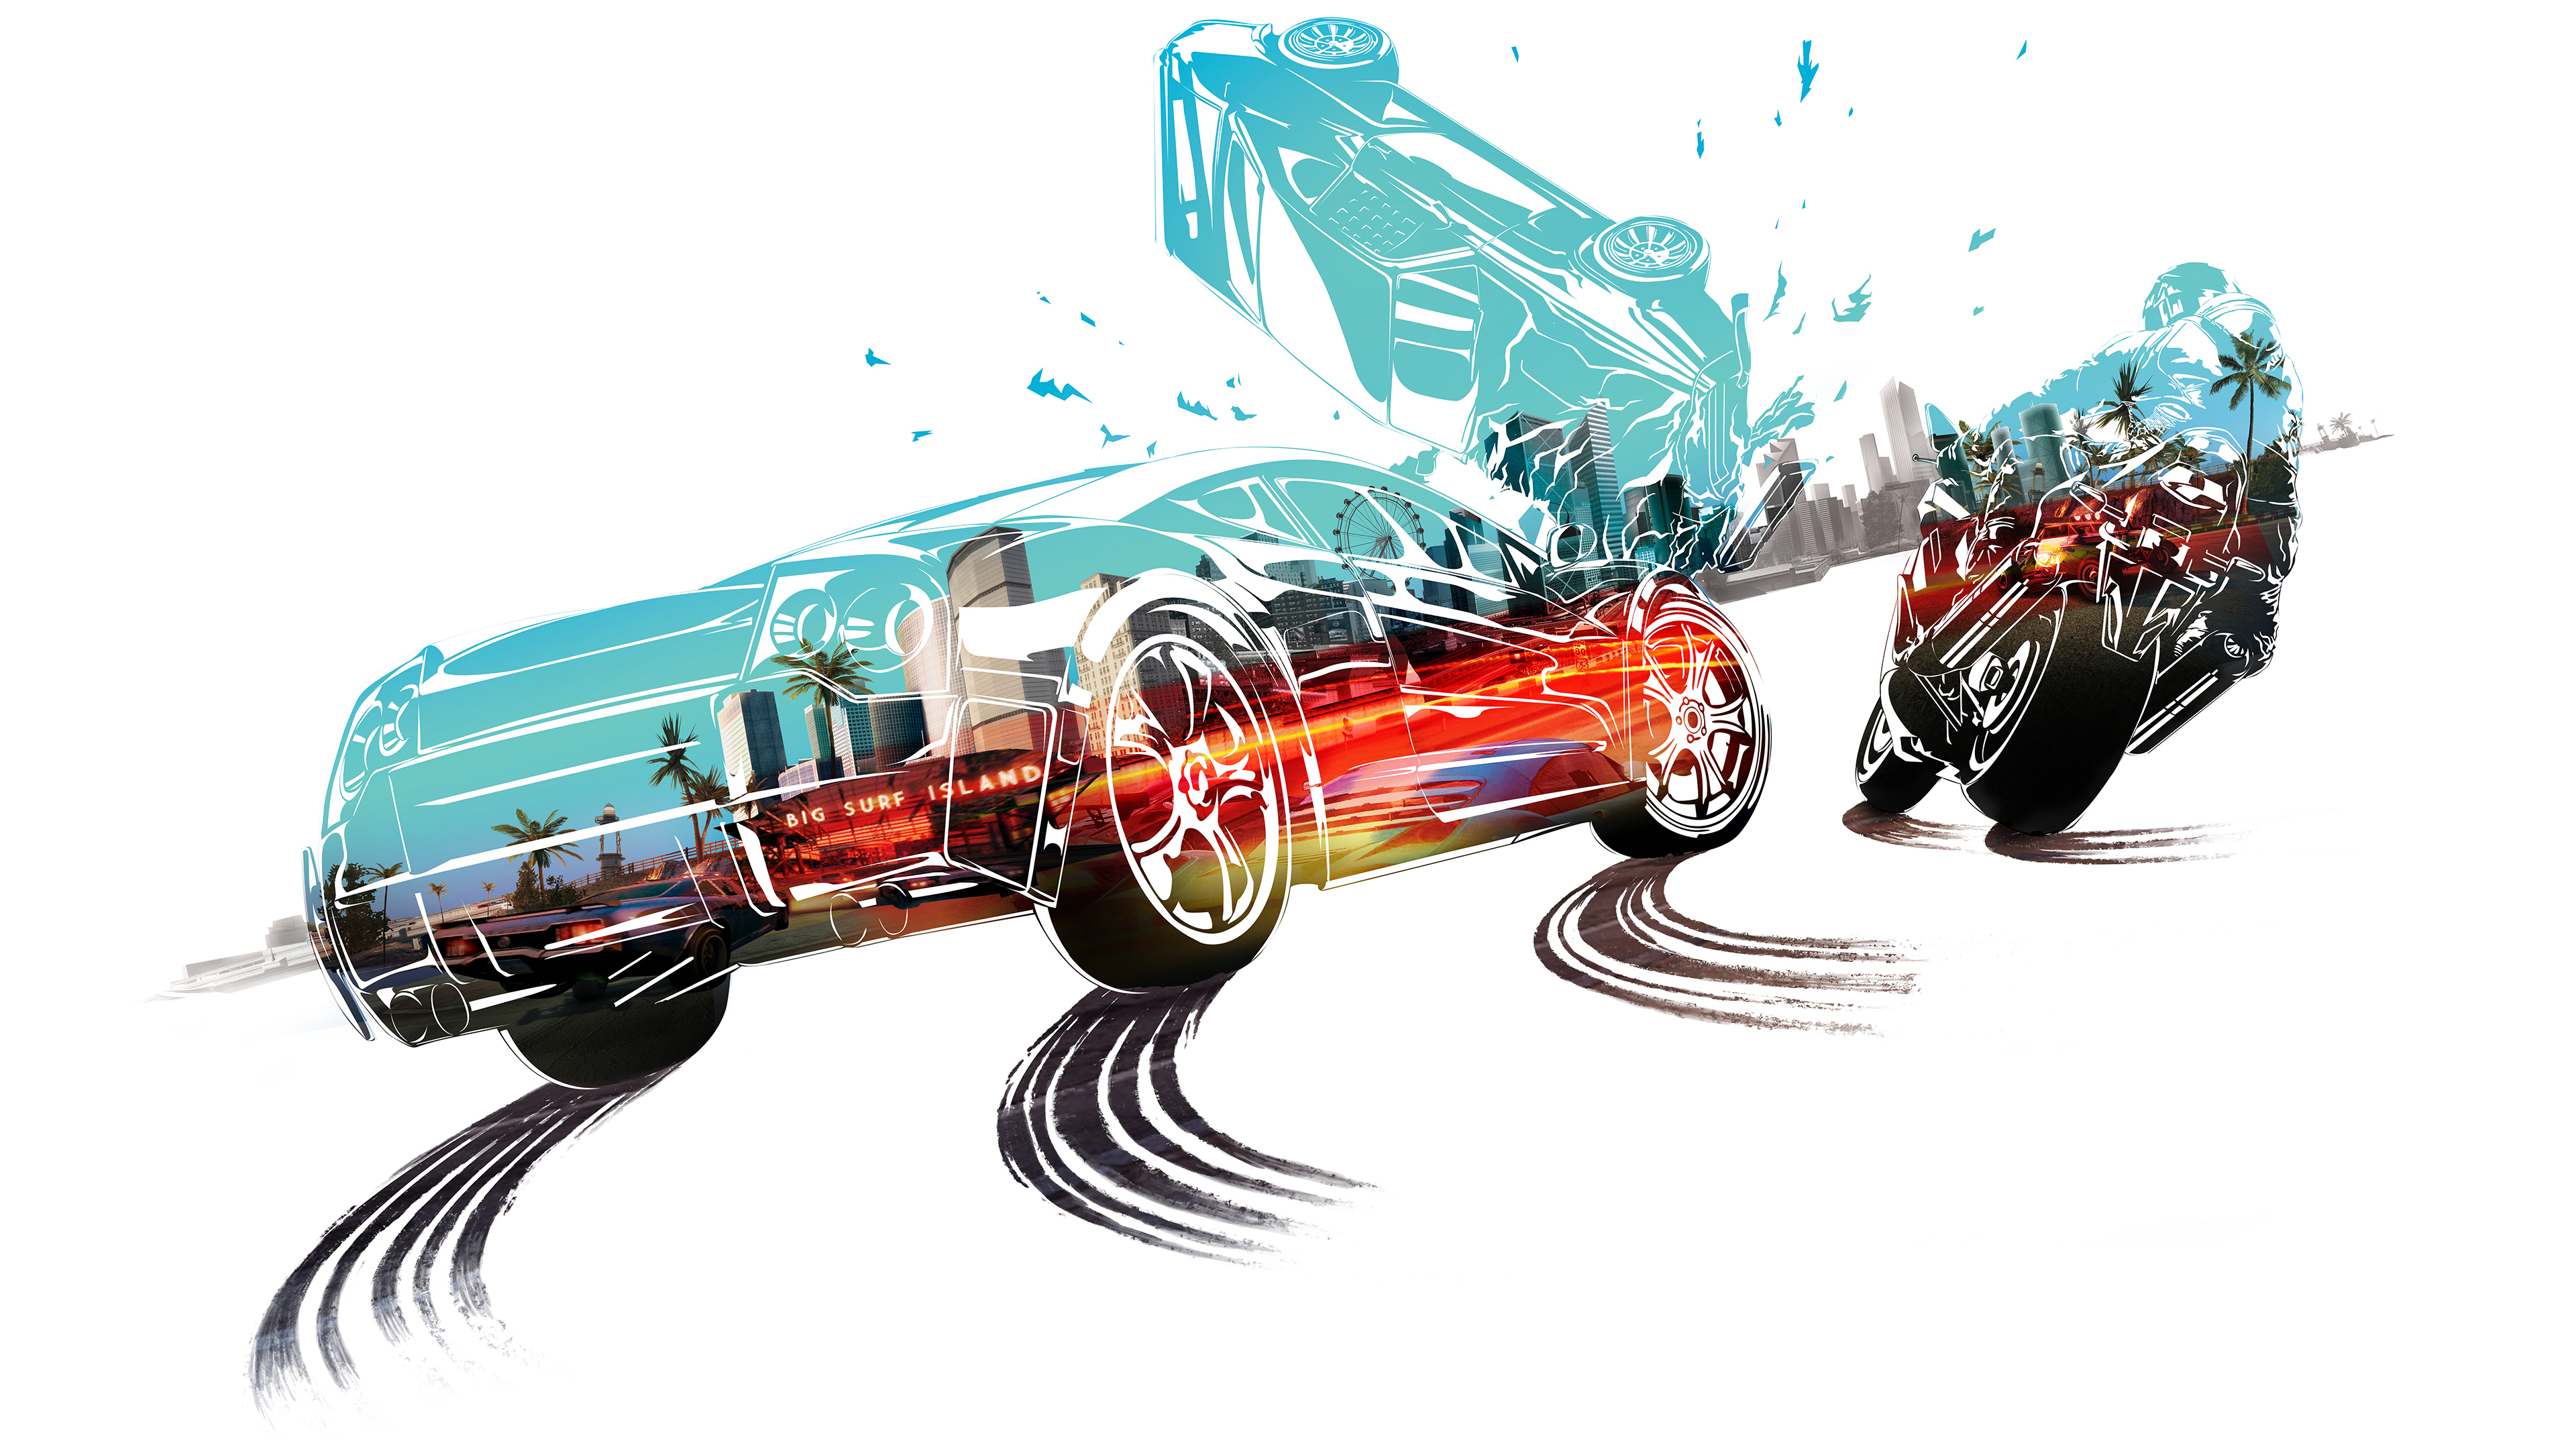 Burnout Paradise Electronic Arts Simple Background White Background Video Game Art Tire Tracks Motor 3840x2160